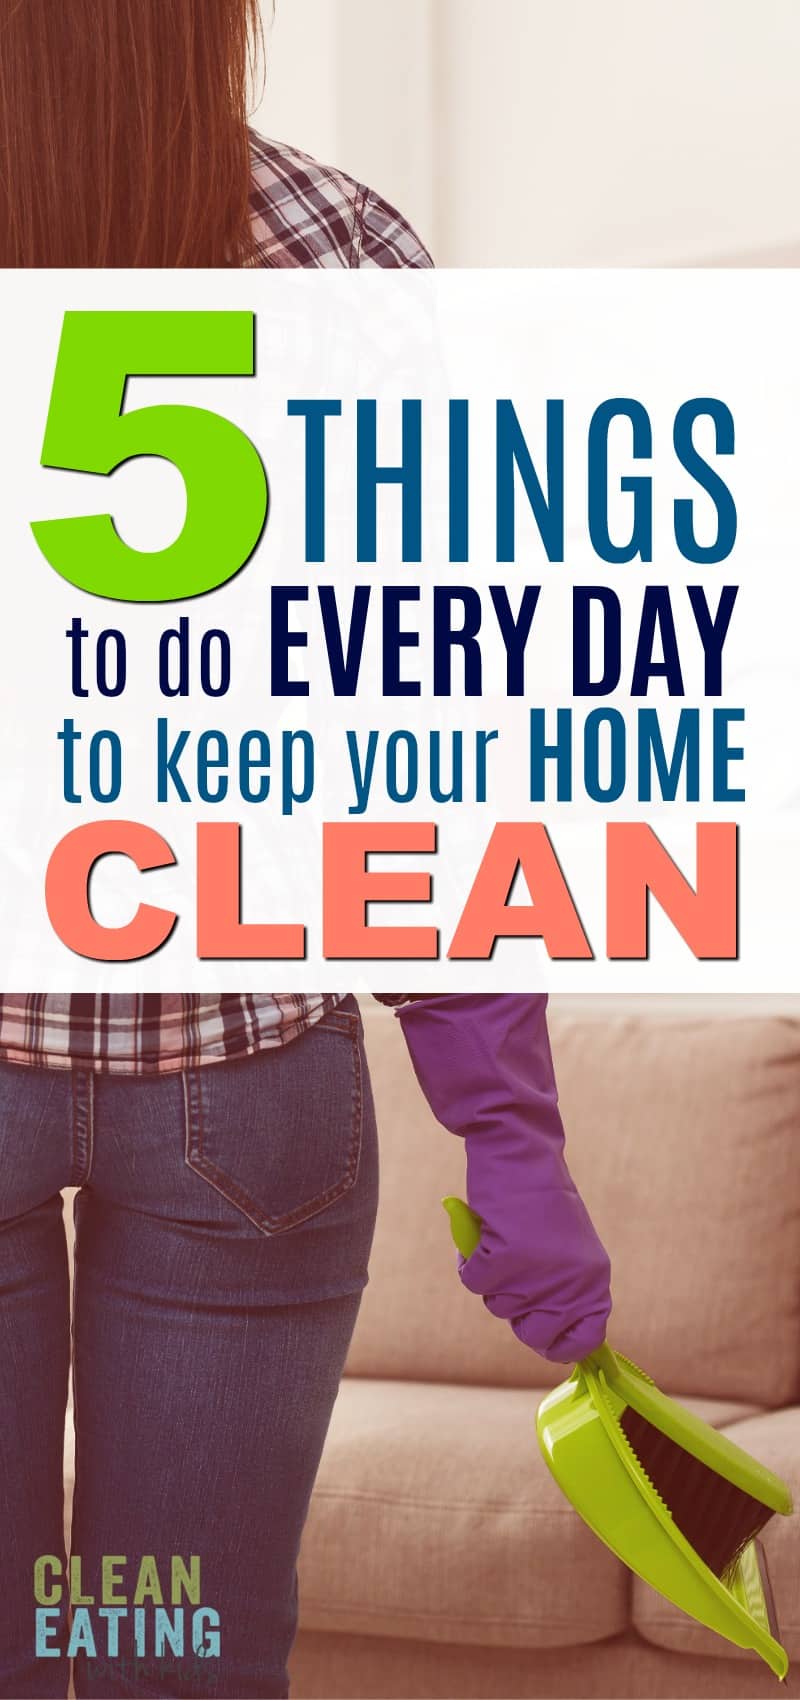 Do these 5 things every day to keep your house clean and clutter free - even when you have kids and pets!